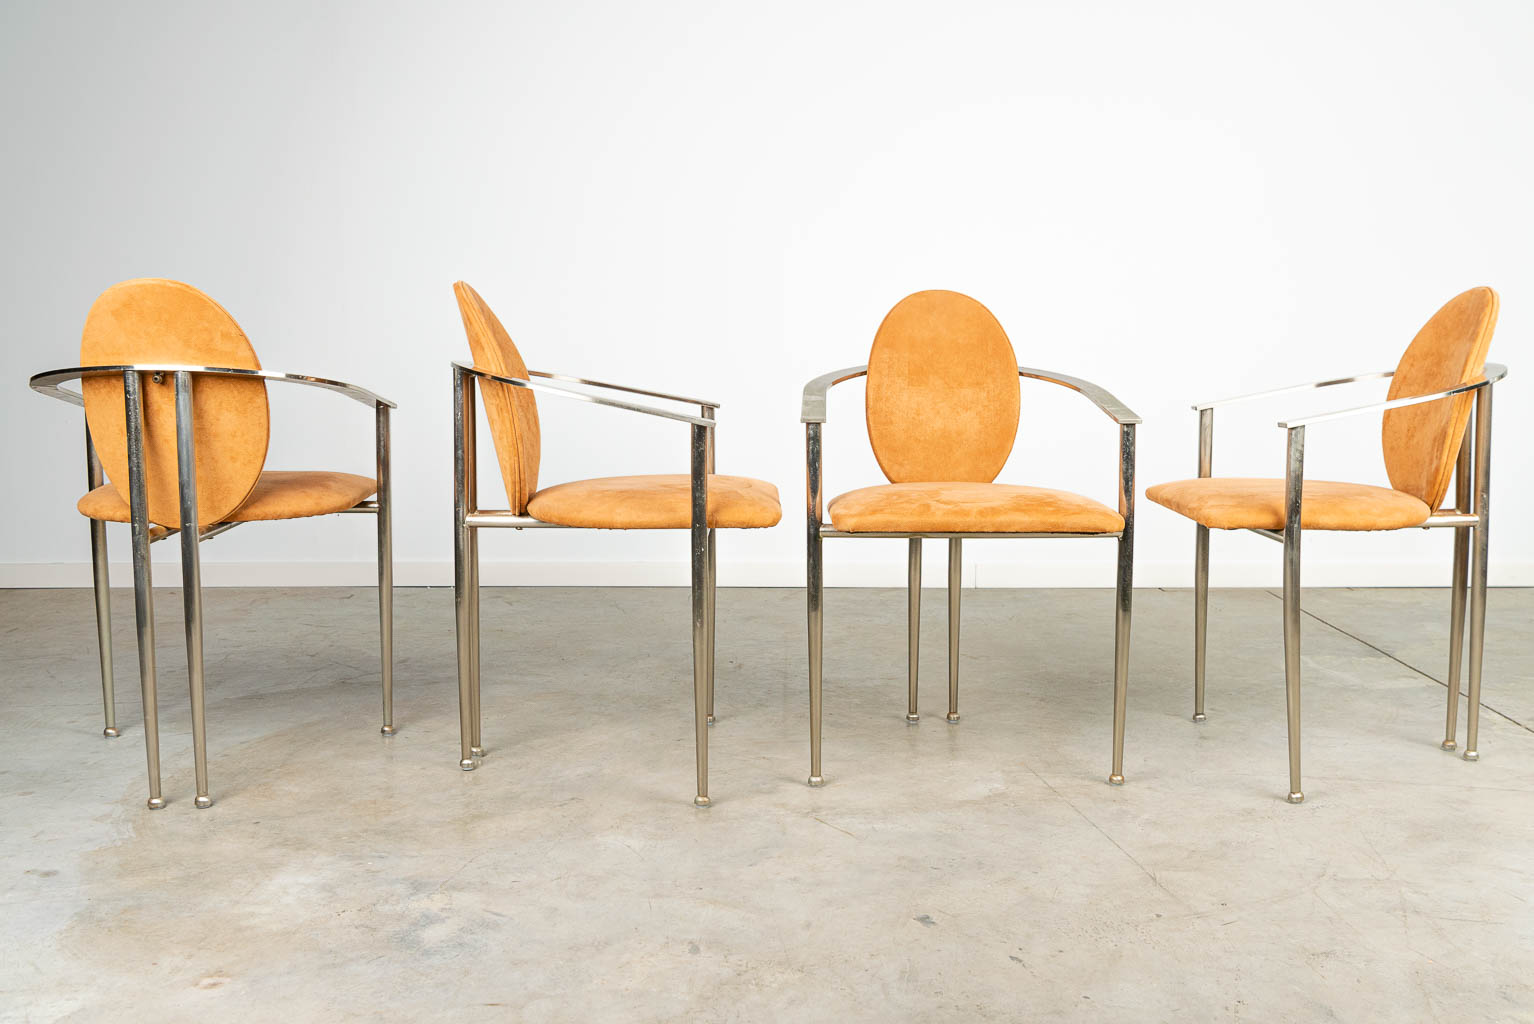 A set of 4 chairs made by Belgo-Chrom of metal and suede leather. (H:81cm)